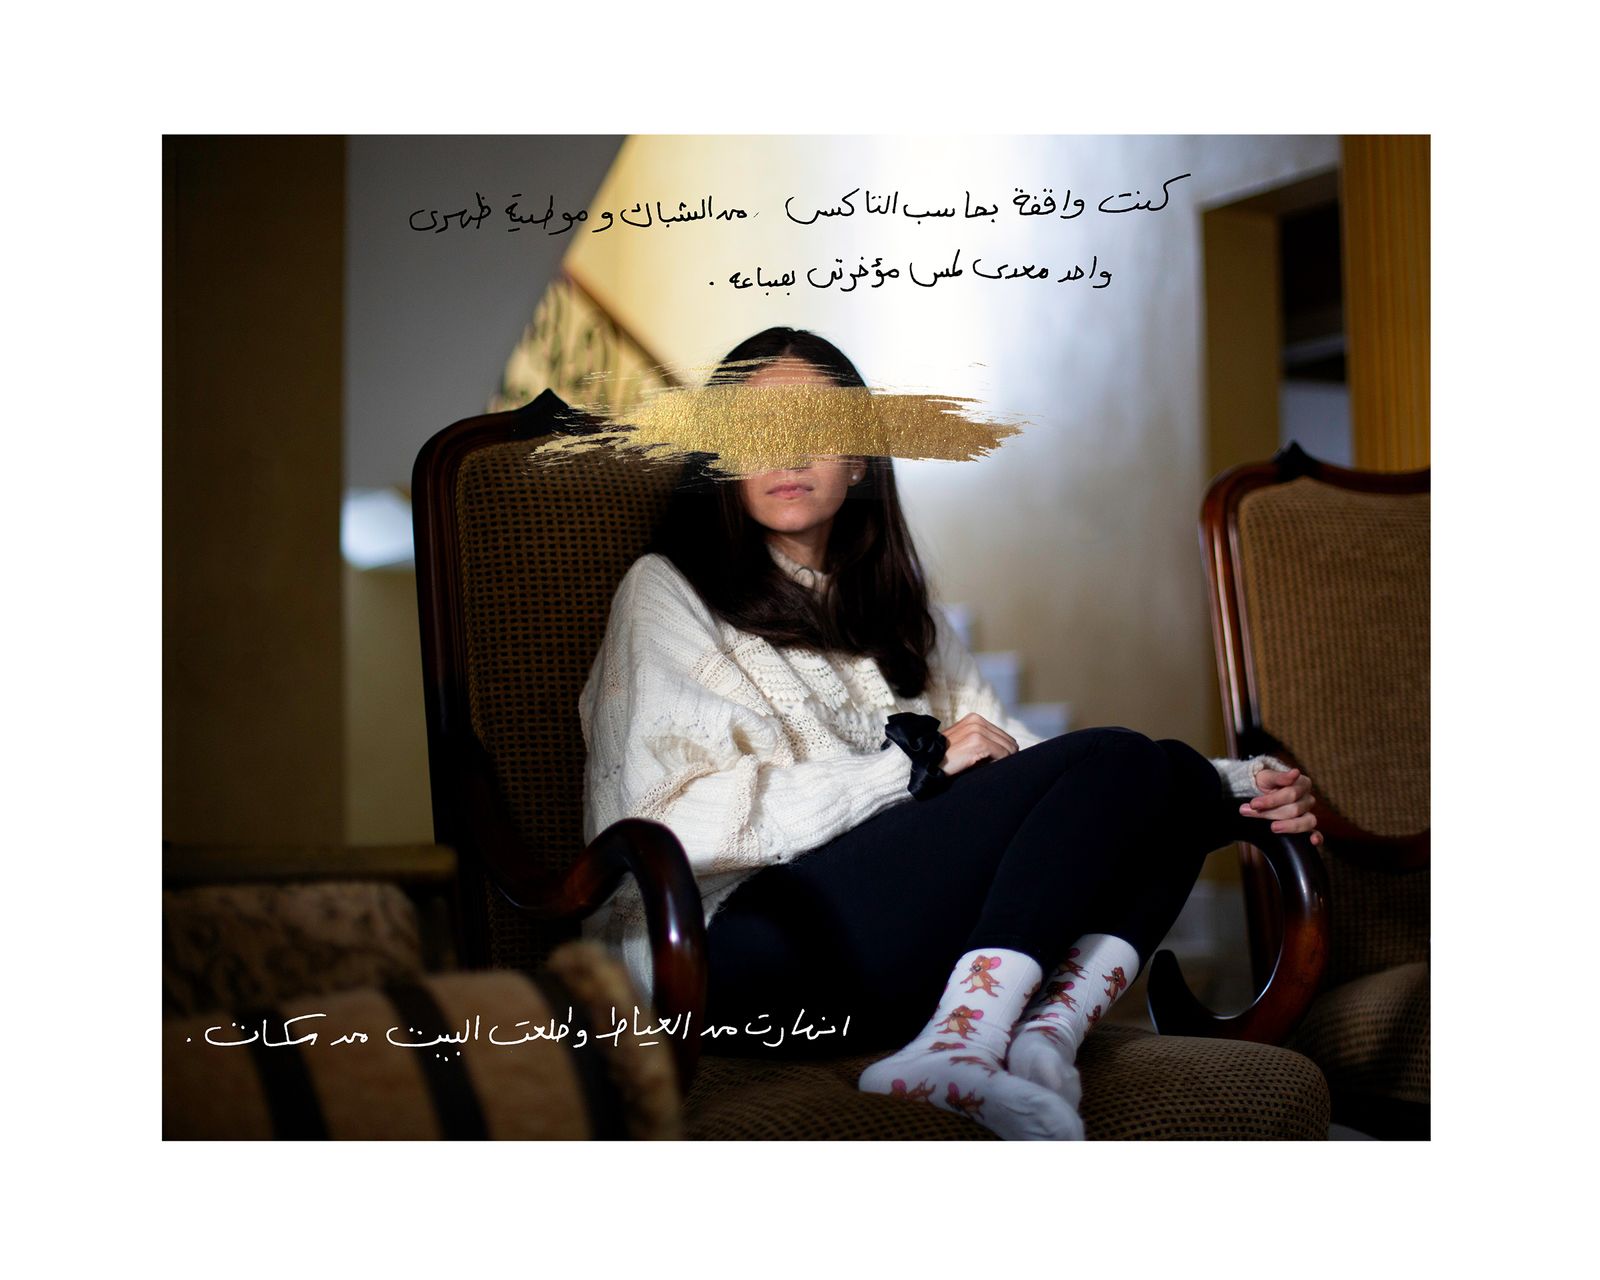 © Lina Geoushy - Image from the Shame Less: A Protest Against Sexual Violence photography project